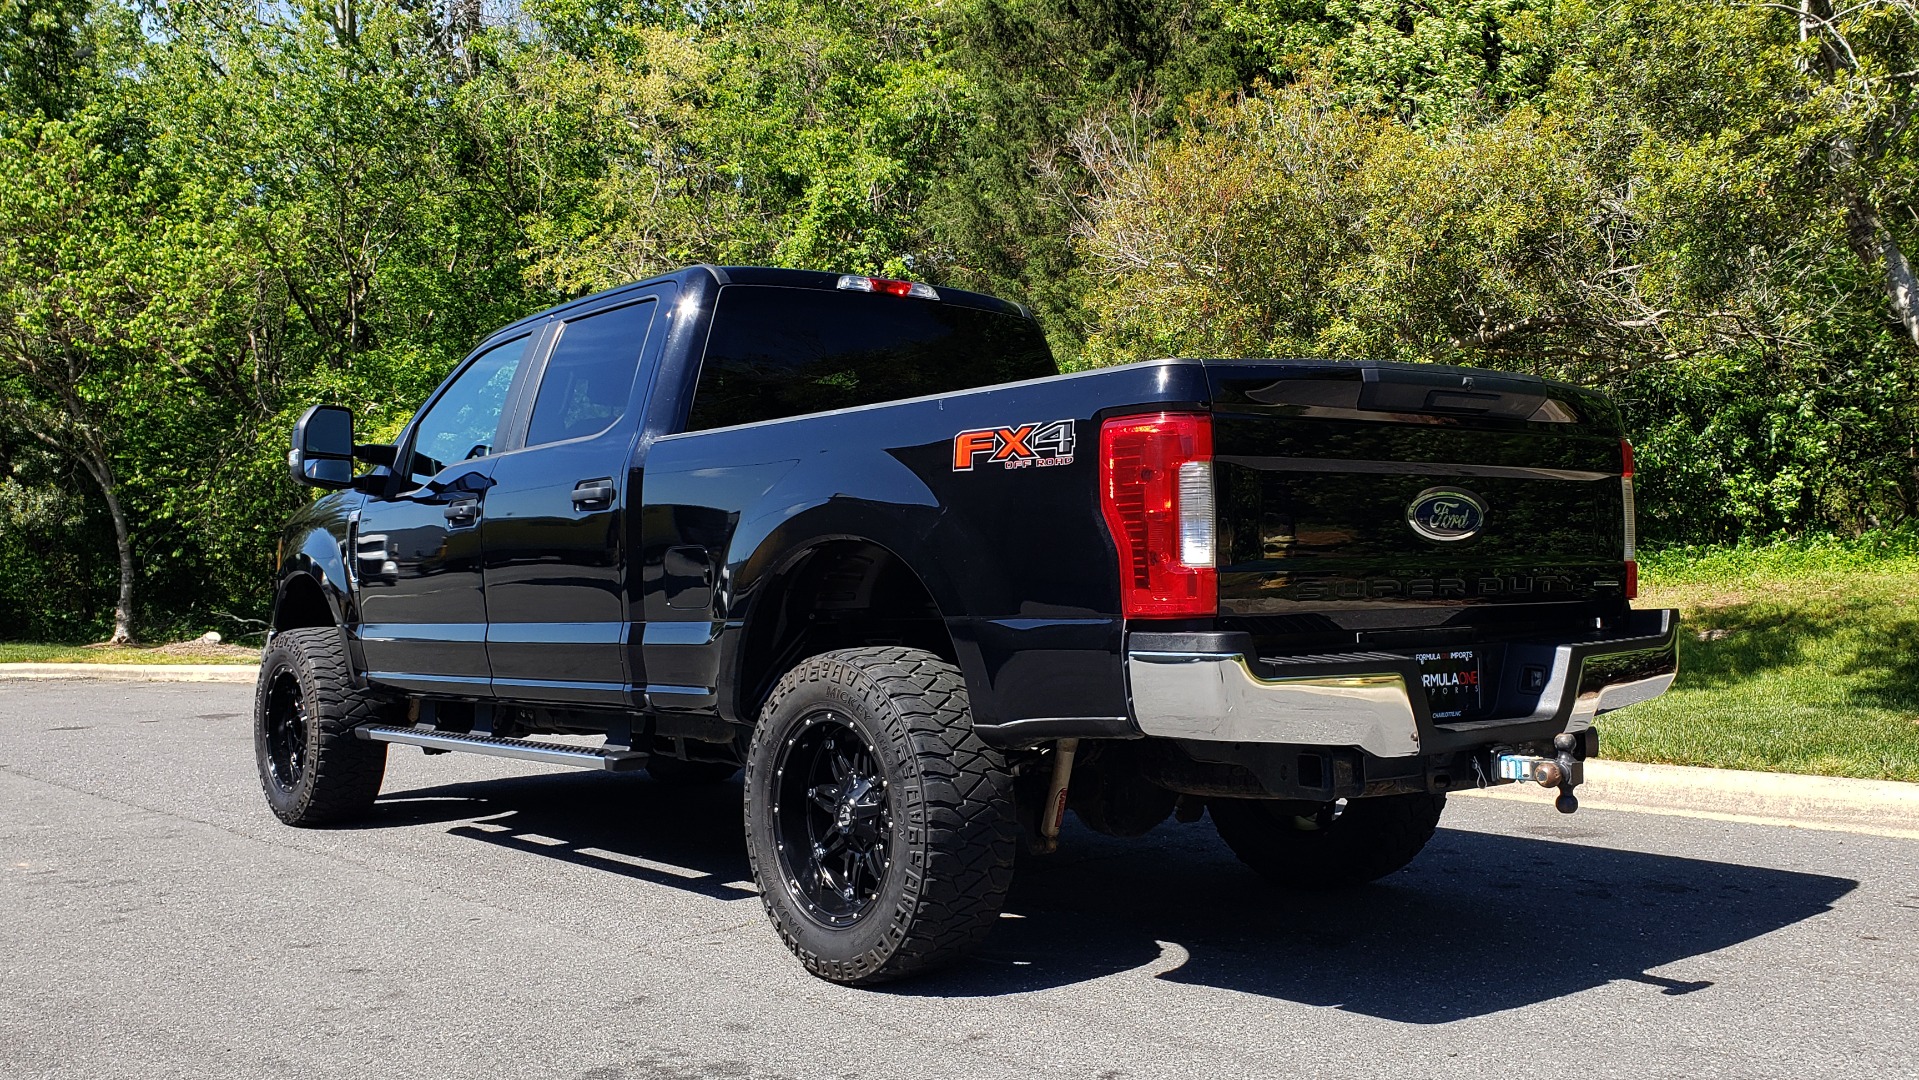 Used 2017 Ford SUPERDUTY F-250 SRW XL 4X4 / 160 WB / 6.2L EFI V8 / 6-SPD AUTO / 6'8 BED for sale Sold at Formula Imports in Charlotte NC 28227 3